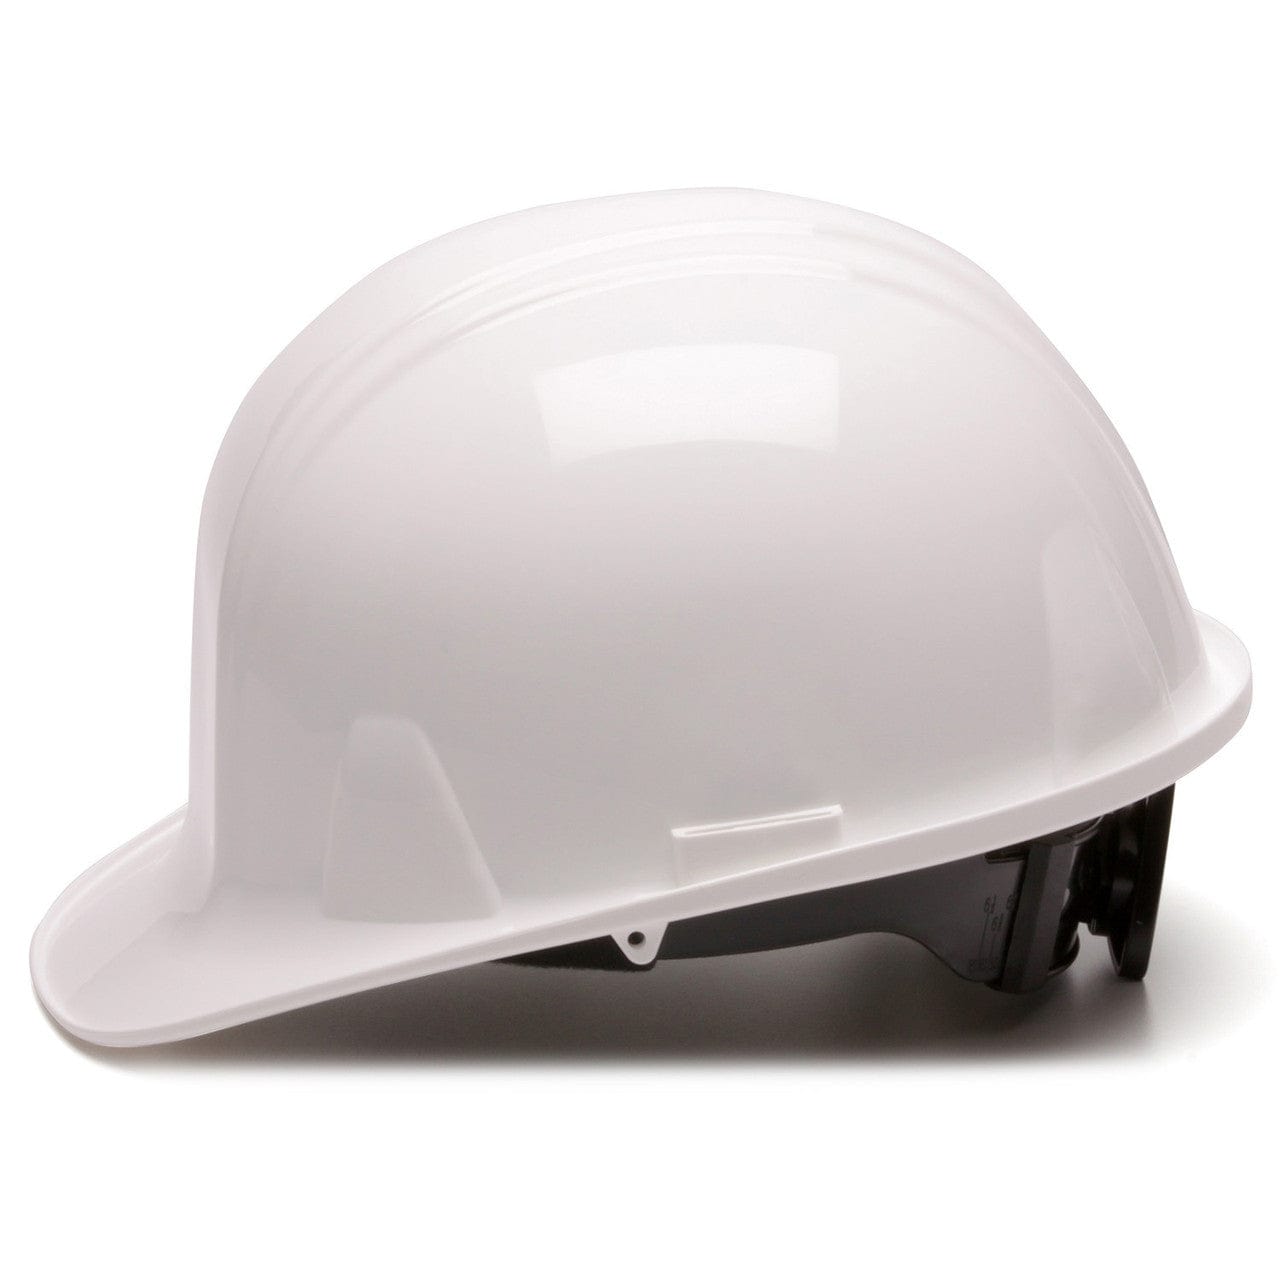 Pyramex Cap Style Hard Hat with 4-Point Ratchet Suspension Side